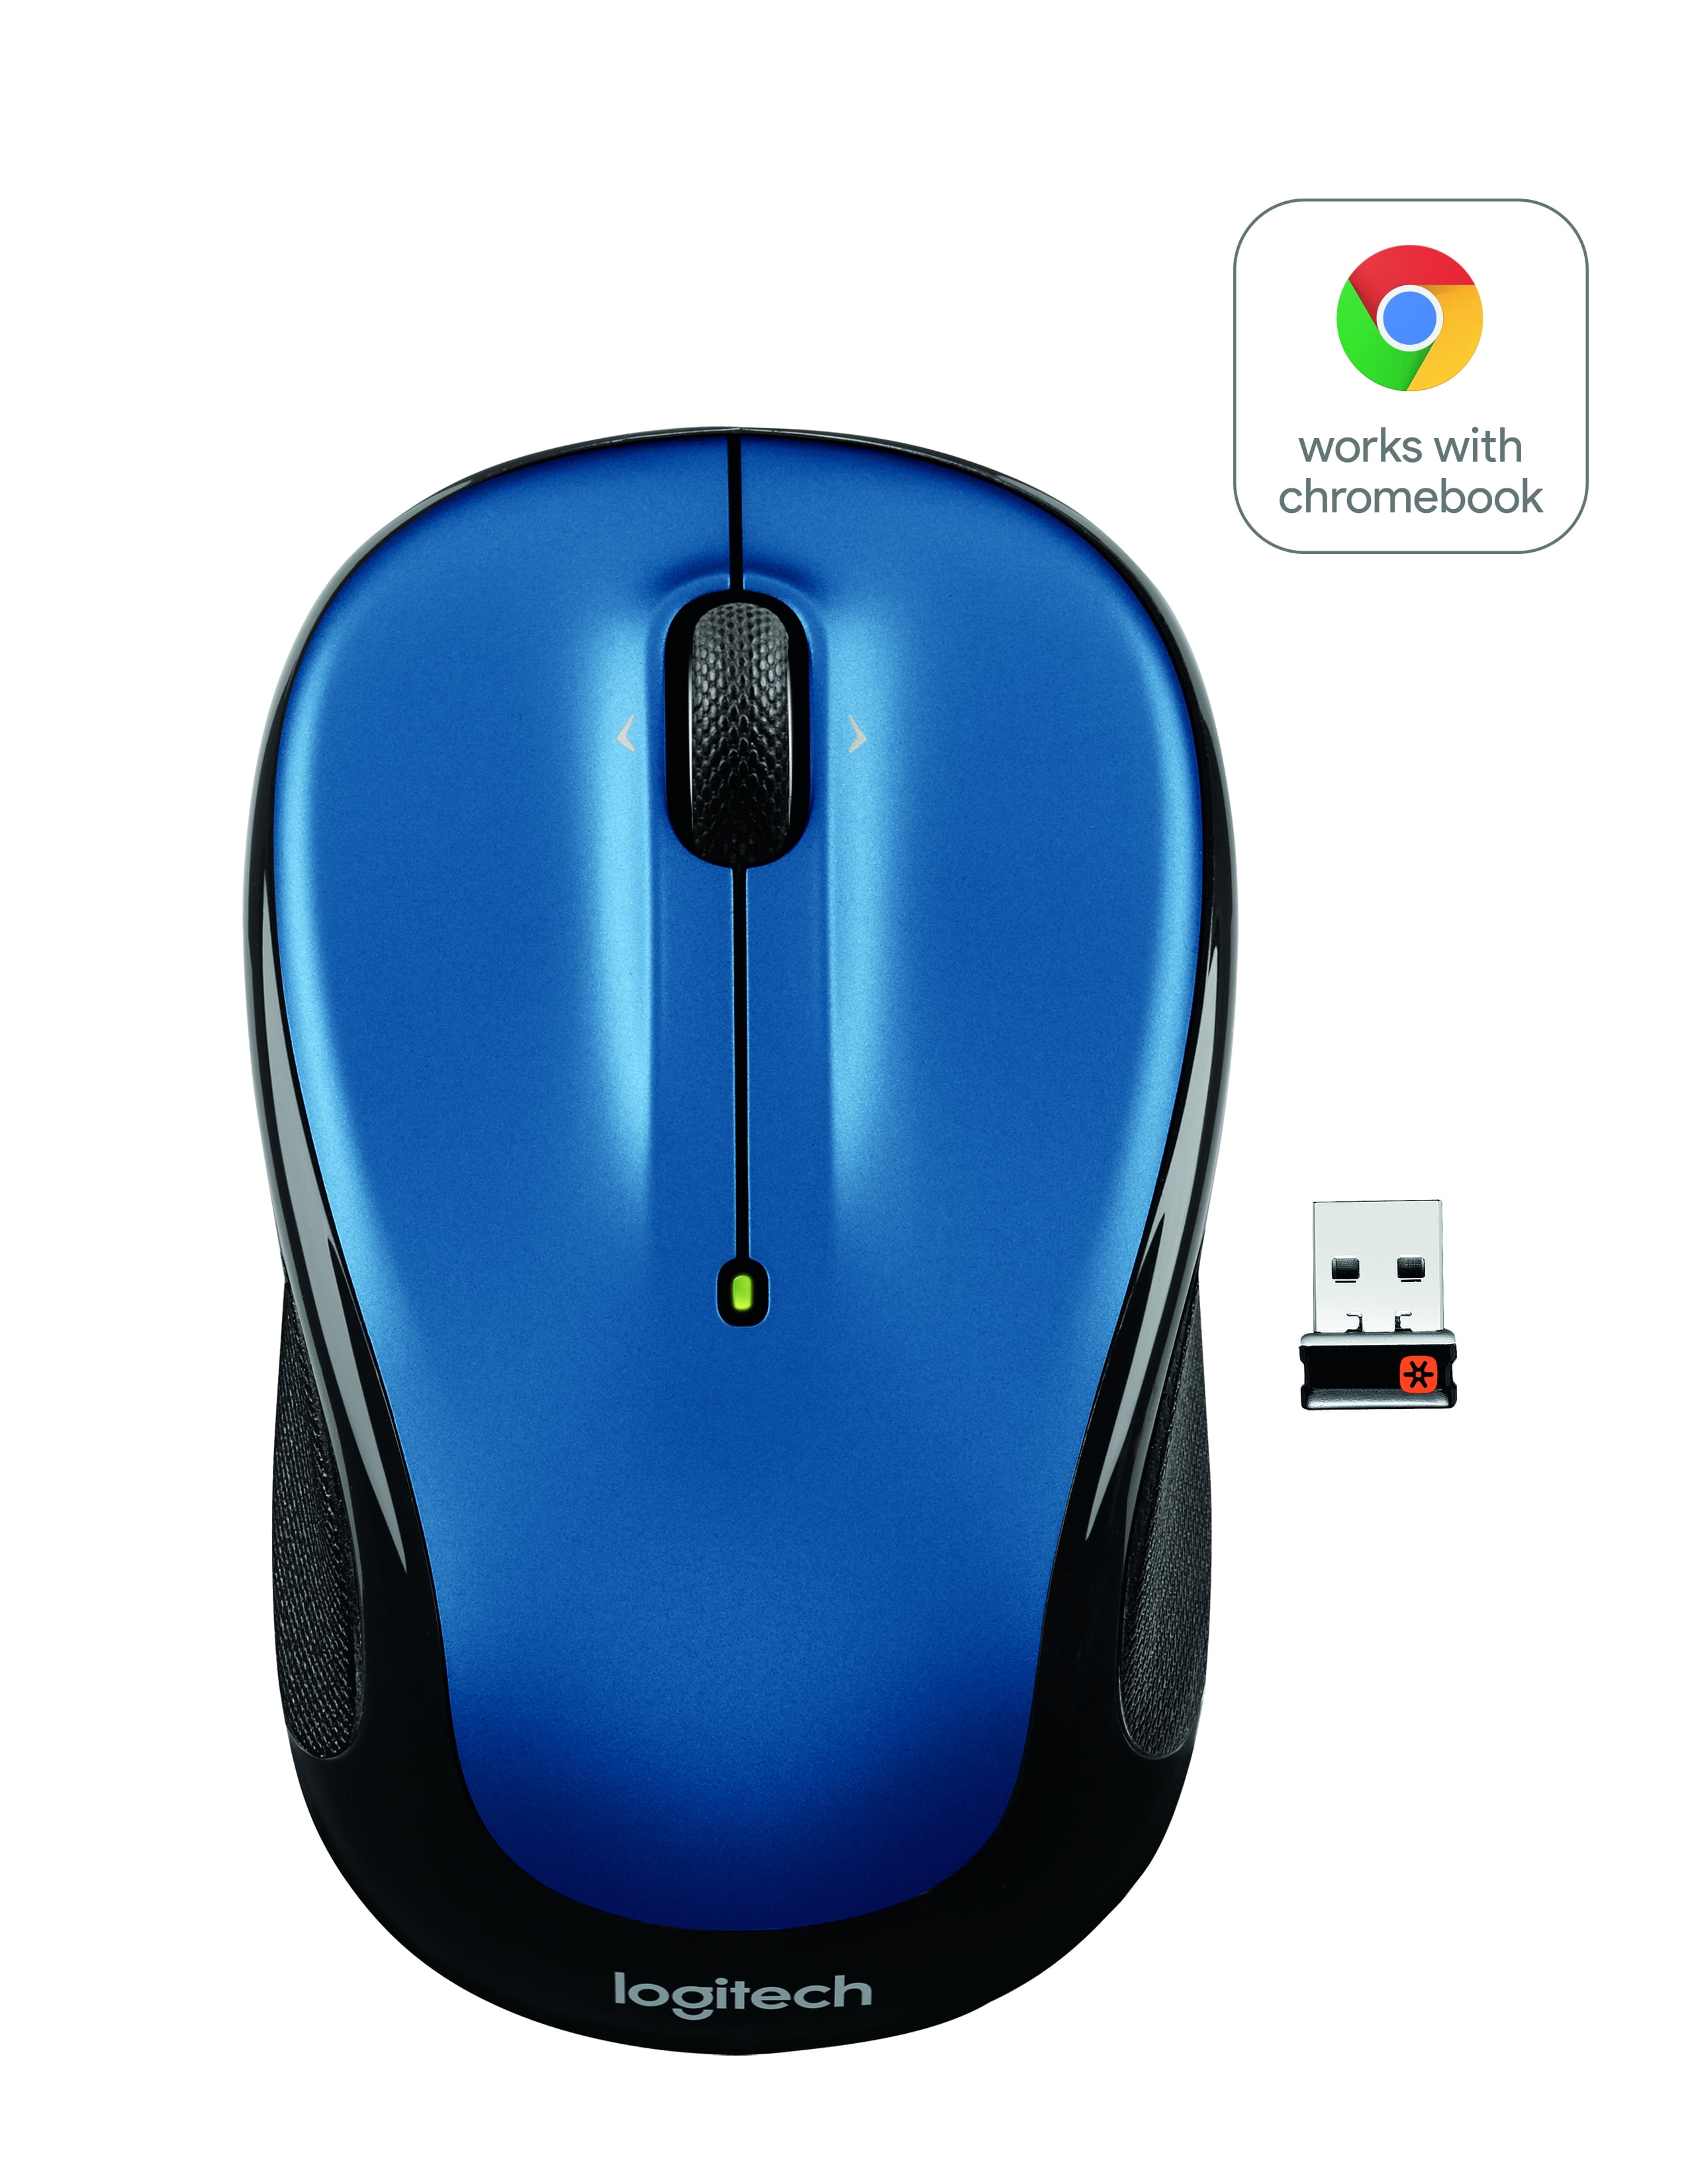 Logitech Compact Wireless Mouse, 2.4 GHz with USB Unifying Receiver, 1000 DPI Optical Tracking, 18-Month Life Battery, PC / Mac / Laptop / Chromebook, Blue